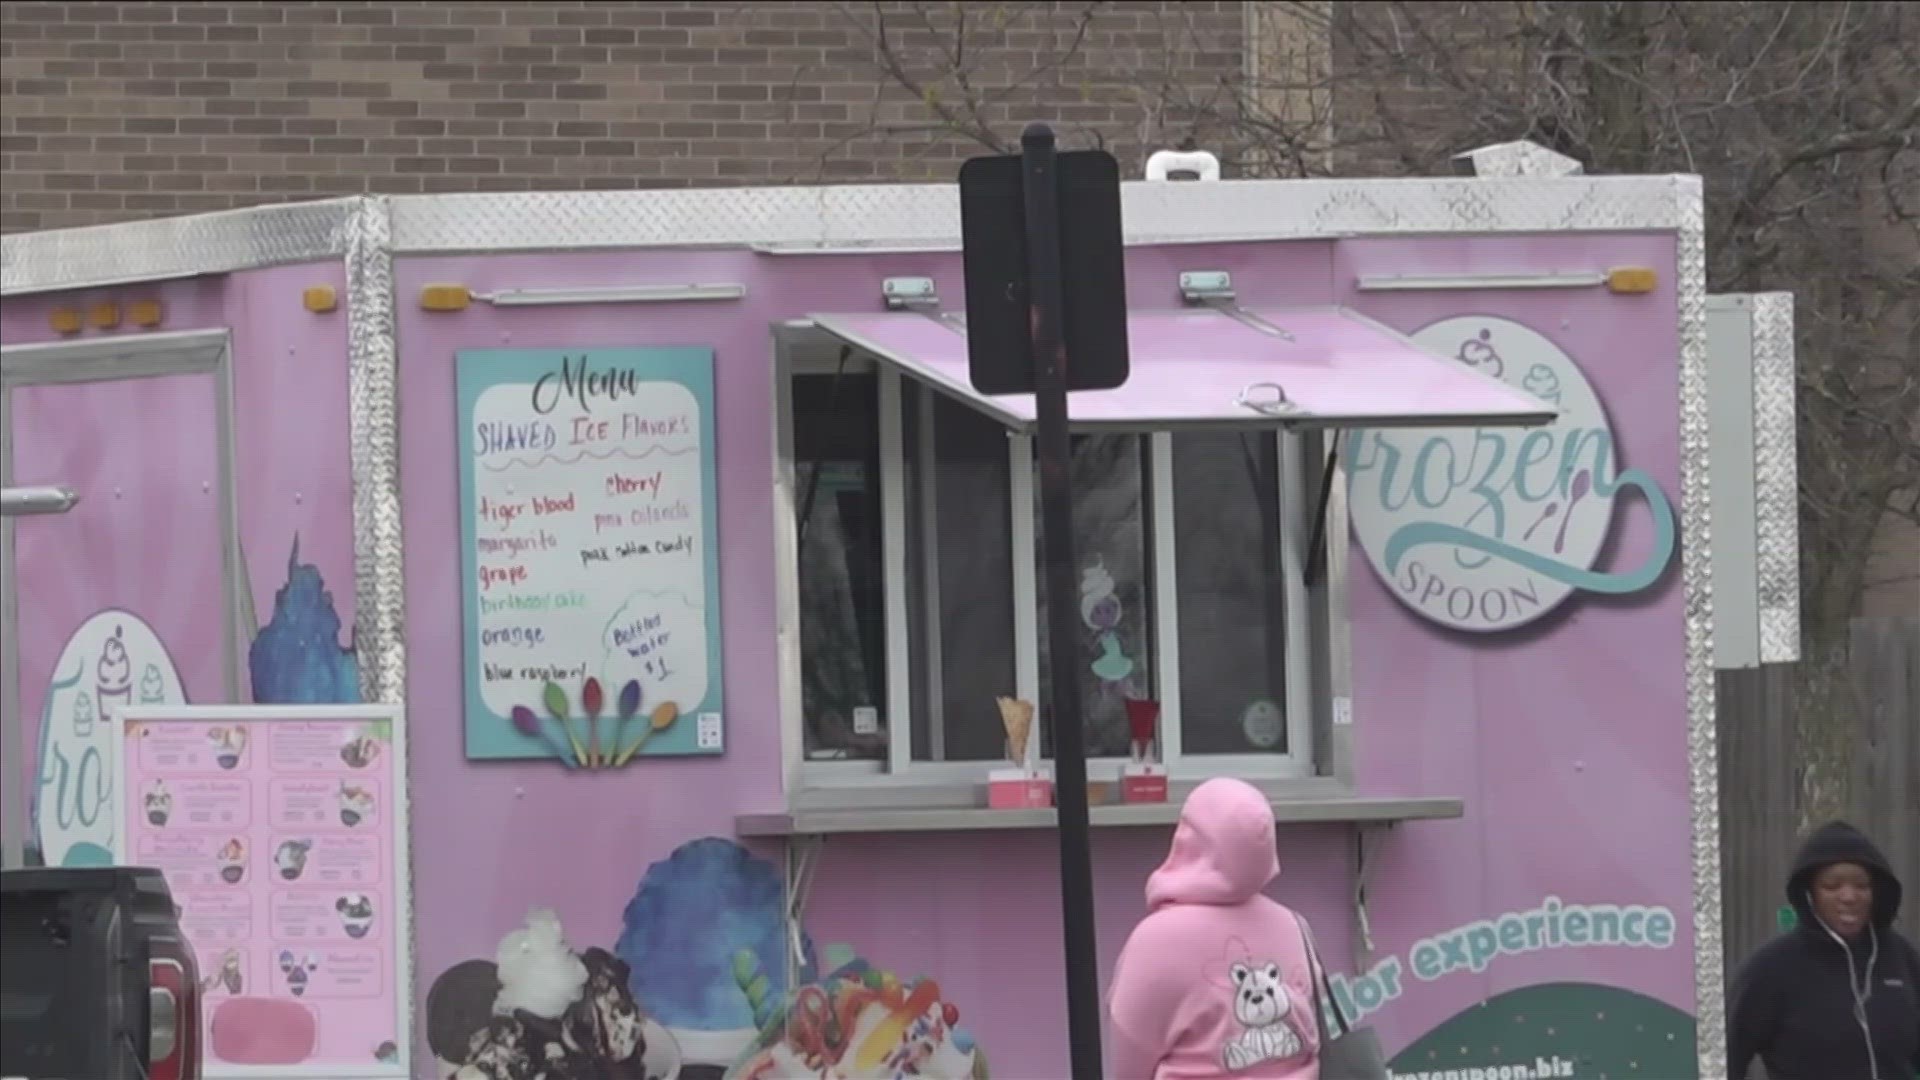 The Sunday event gave dozens of minority-owned food truck owners a chance to up their business and bring in new customers.